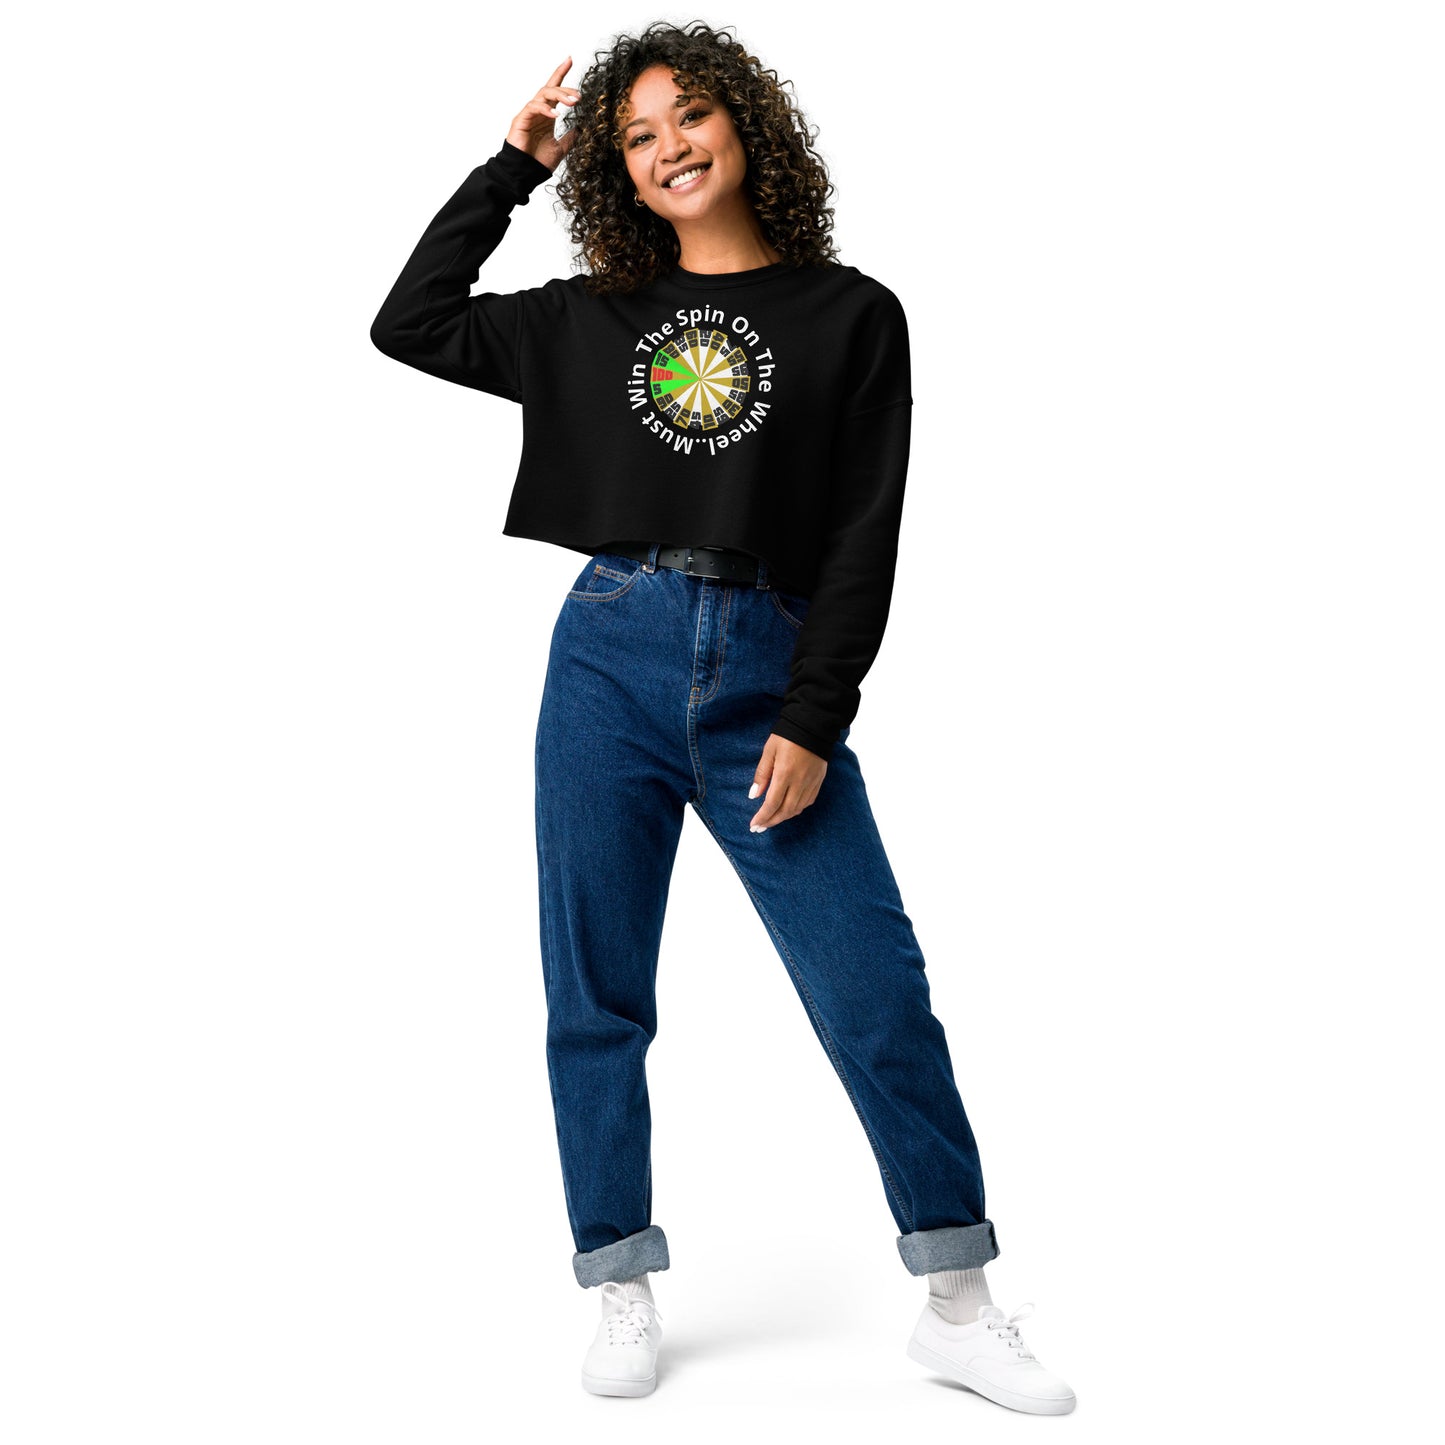 Crop Sweatshirt - The Price Is Right - Spin The Wheel on Front - Greeting to Family & Friends on Back